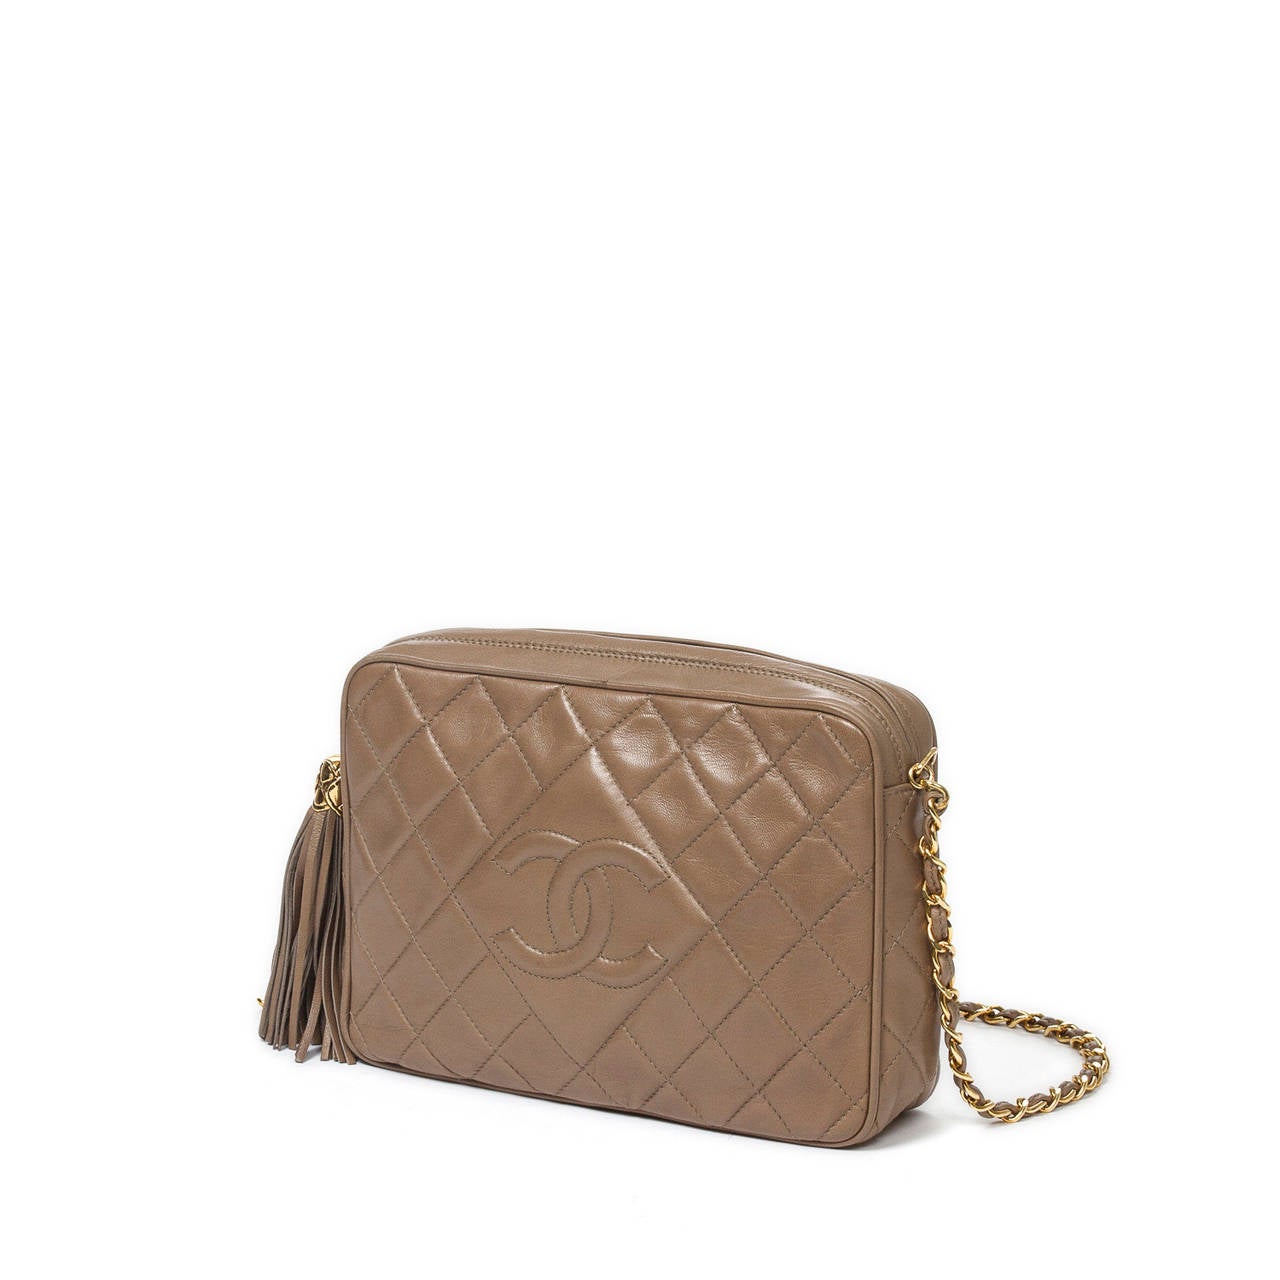 Vintage shoulder bag in taupe quilted leather with front CC, long chain strap interlaced with leather, leather tassel zipper toggle, gold tone hardware. Light brown leather interior with one zip pocket. Dustbag, authenticity sticker and card